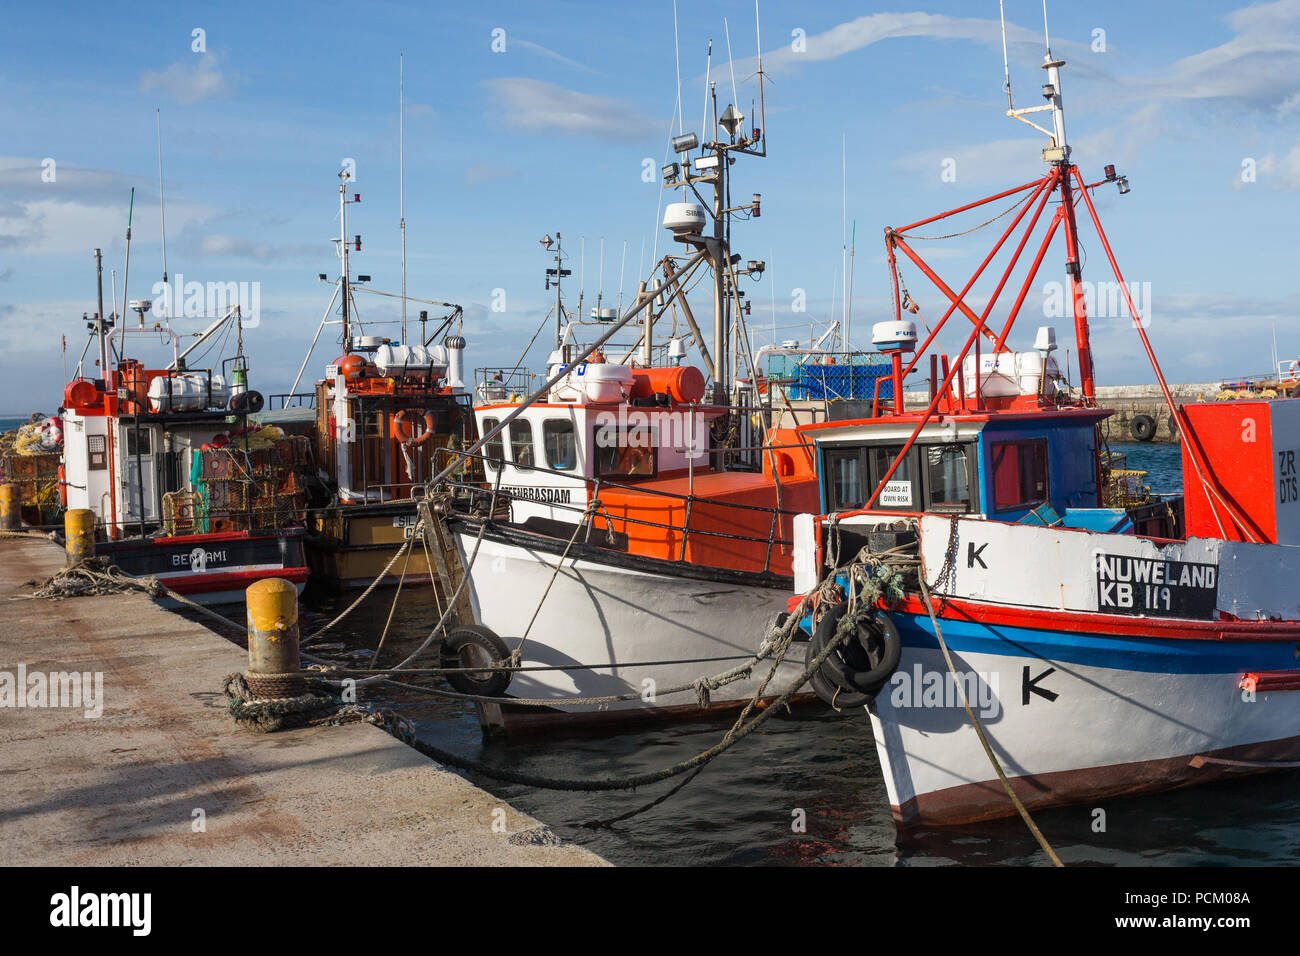 colourful and multicoloured fishing boats moored at the quayside on a sunny day in Kalk Bay harbour or harbor, False Bay, Cape Peninsula, South Africa Stock Photo